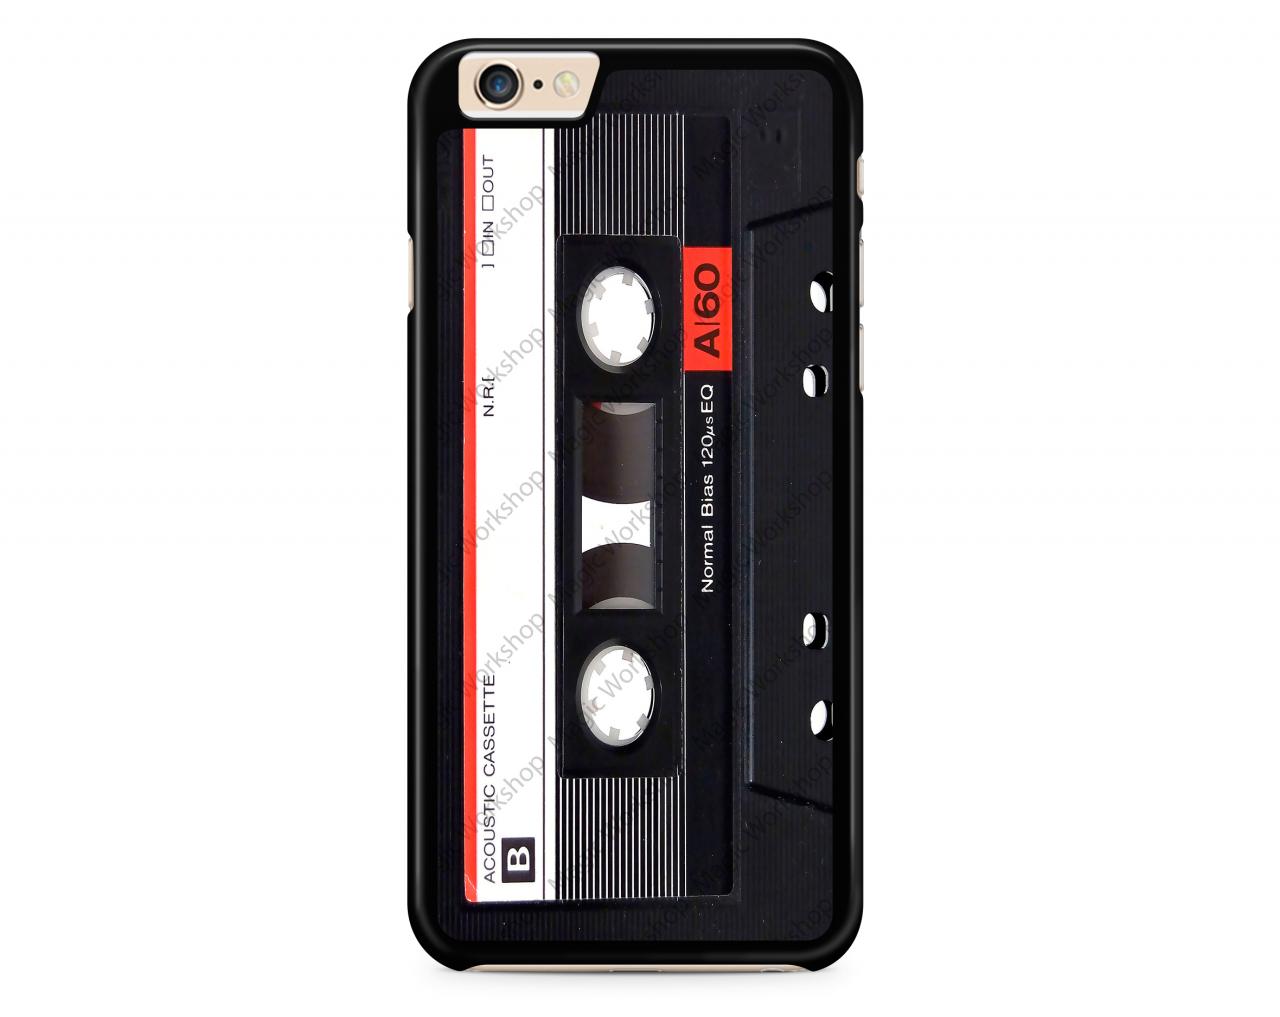 Audio Tape, Cassette Case For Iphone 4 4s 5 5s 5c 6 6 Plus 6s 6s Plus, Samsung Galaxy S3 S4 S5 S6 S6 Edge S7 S7 Edge Lg G3, Lg G4, Htc One M8,